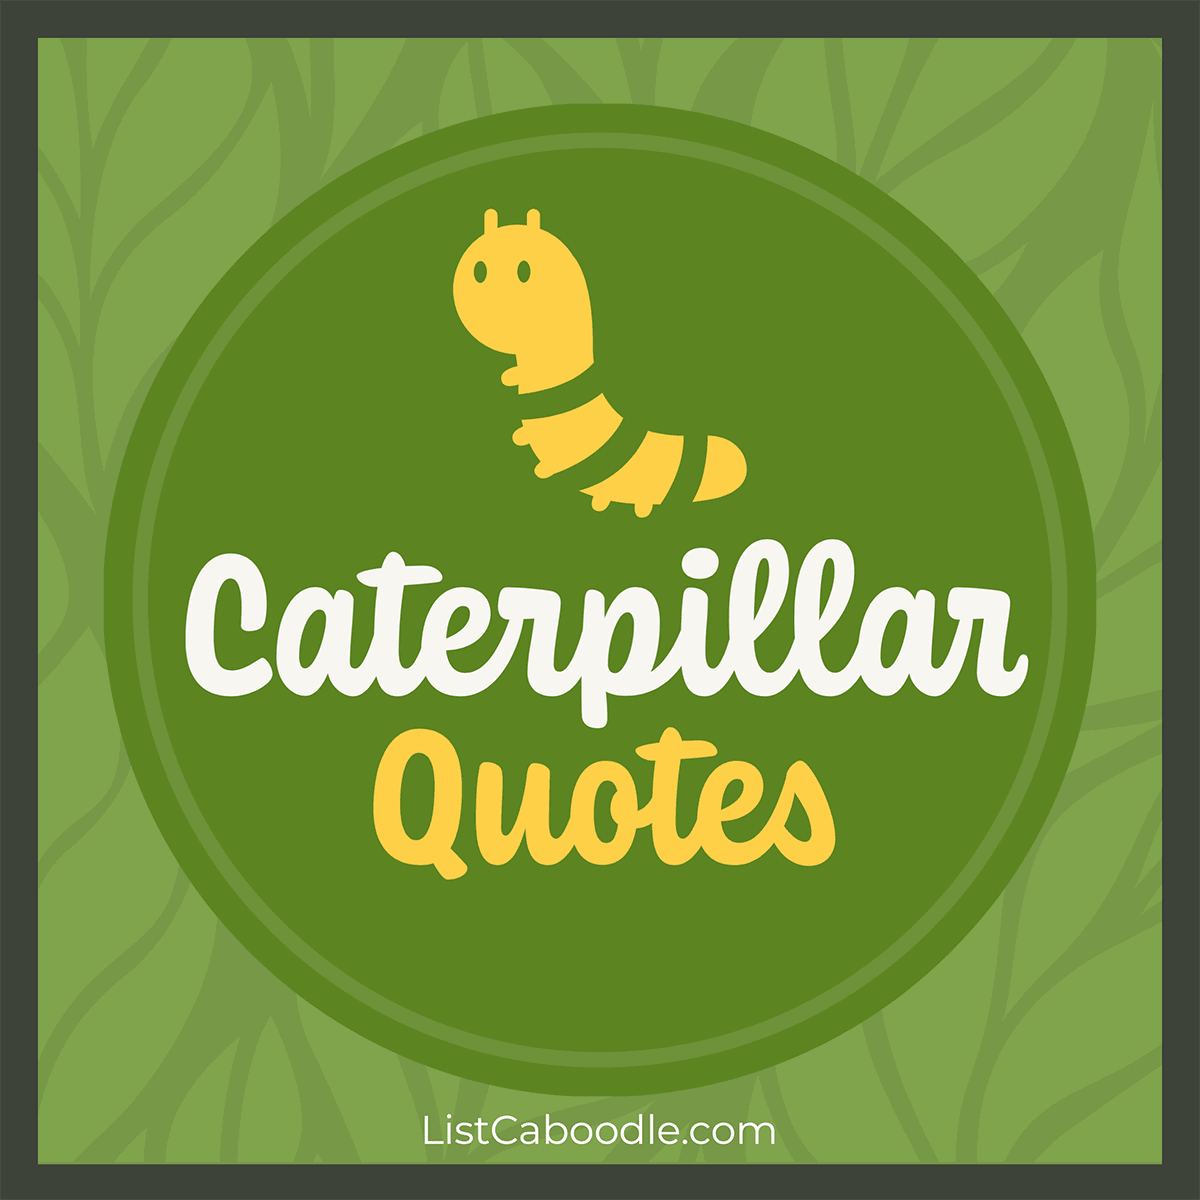 89 Inspiring Caterpillar Quotes (For Change & Renewal) | ListCaboodle